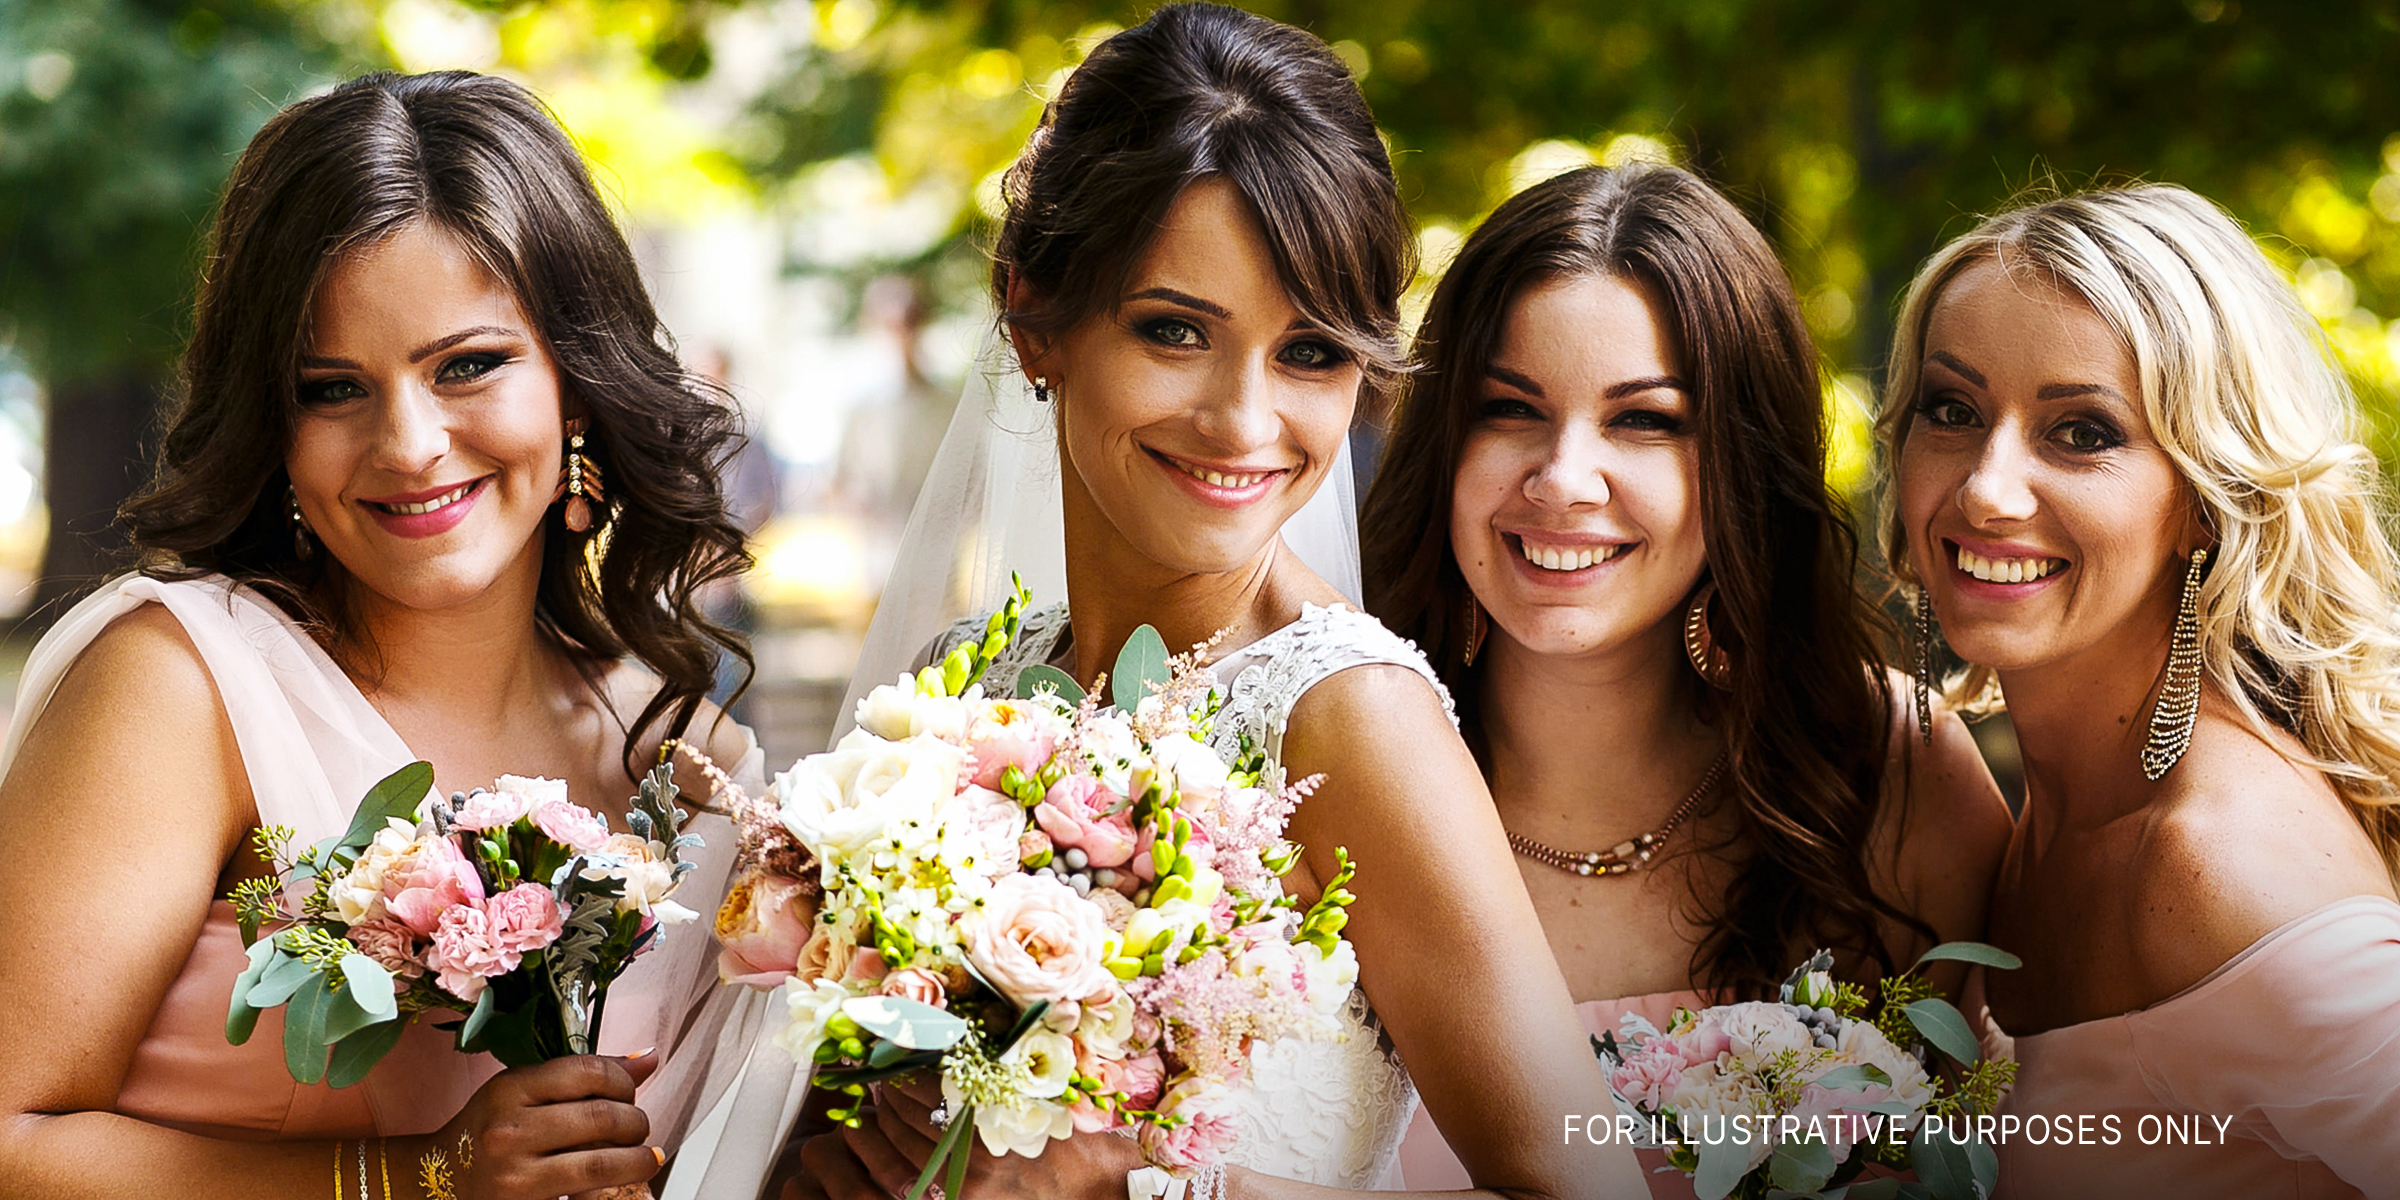 A happy bridal party | Source: Shutterstock